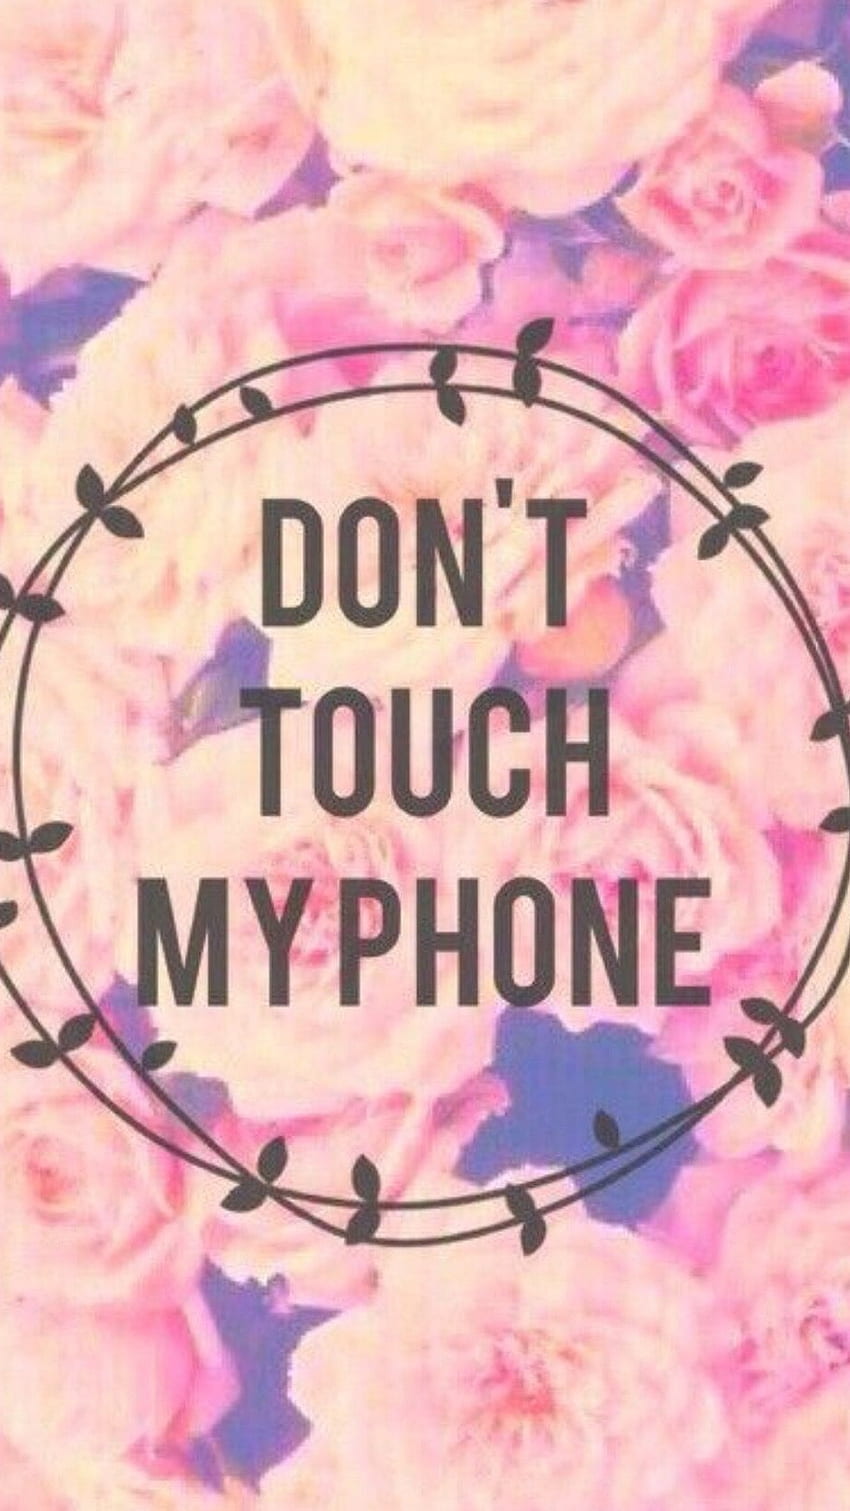 Don't Touch My Phone, Mobile Warning, Lock Screen HD phone wallpaper